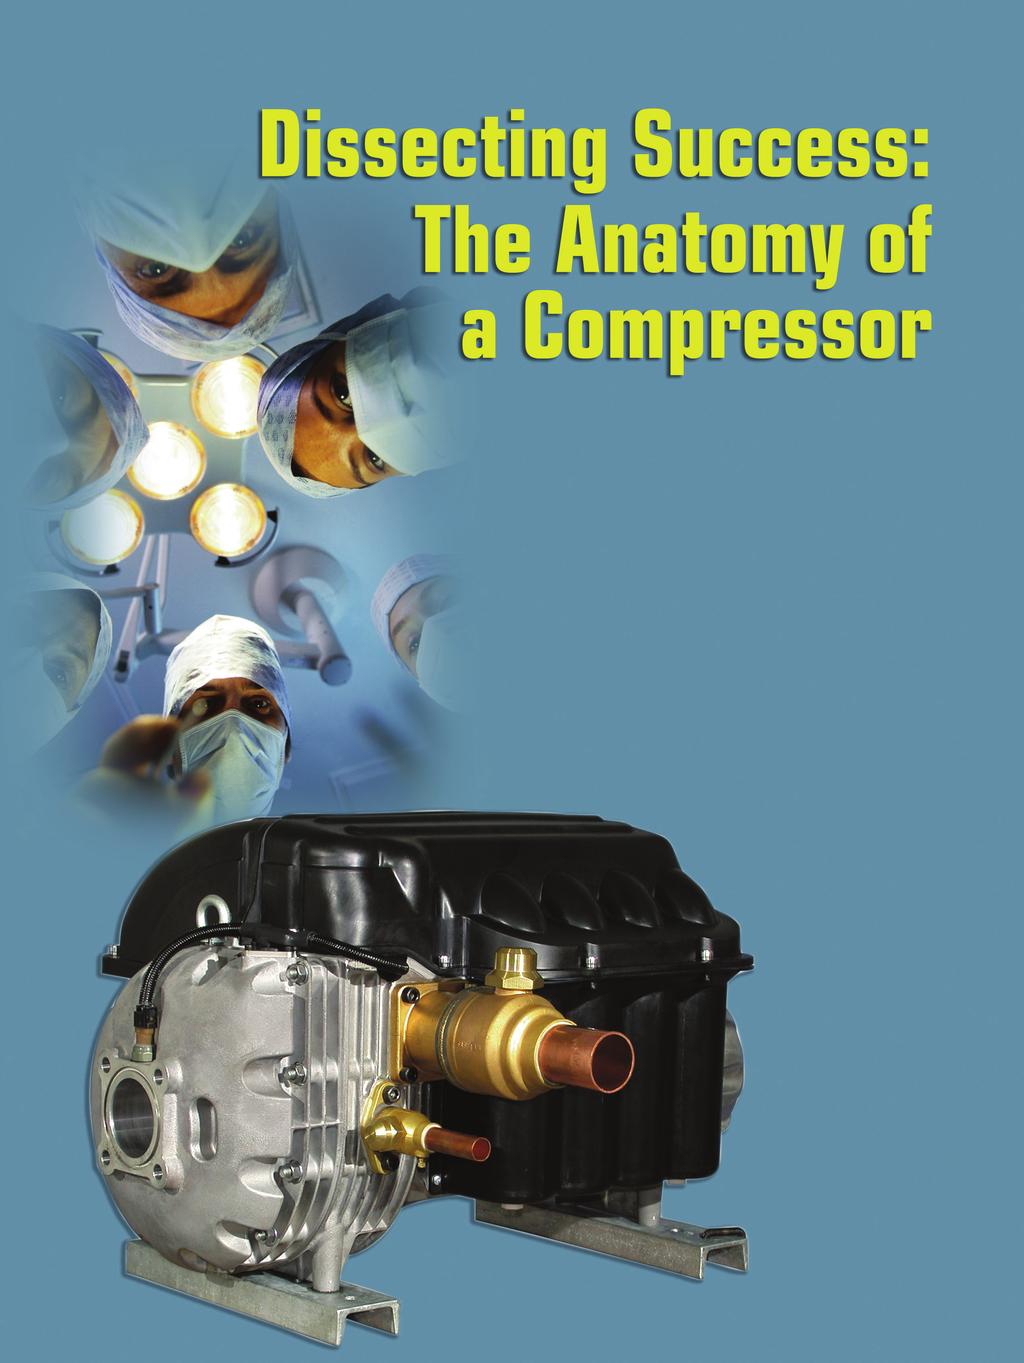 NEW TECHNOLOGY The Turbocor T T300 compressor won an Energy Innovation Award at the 2003 AHR Expo in Chicago